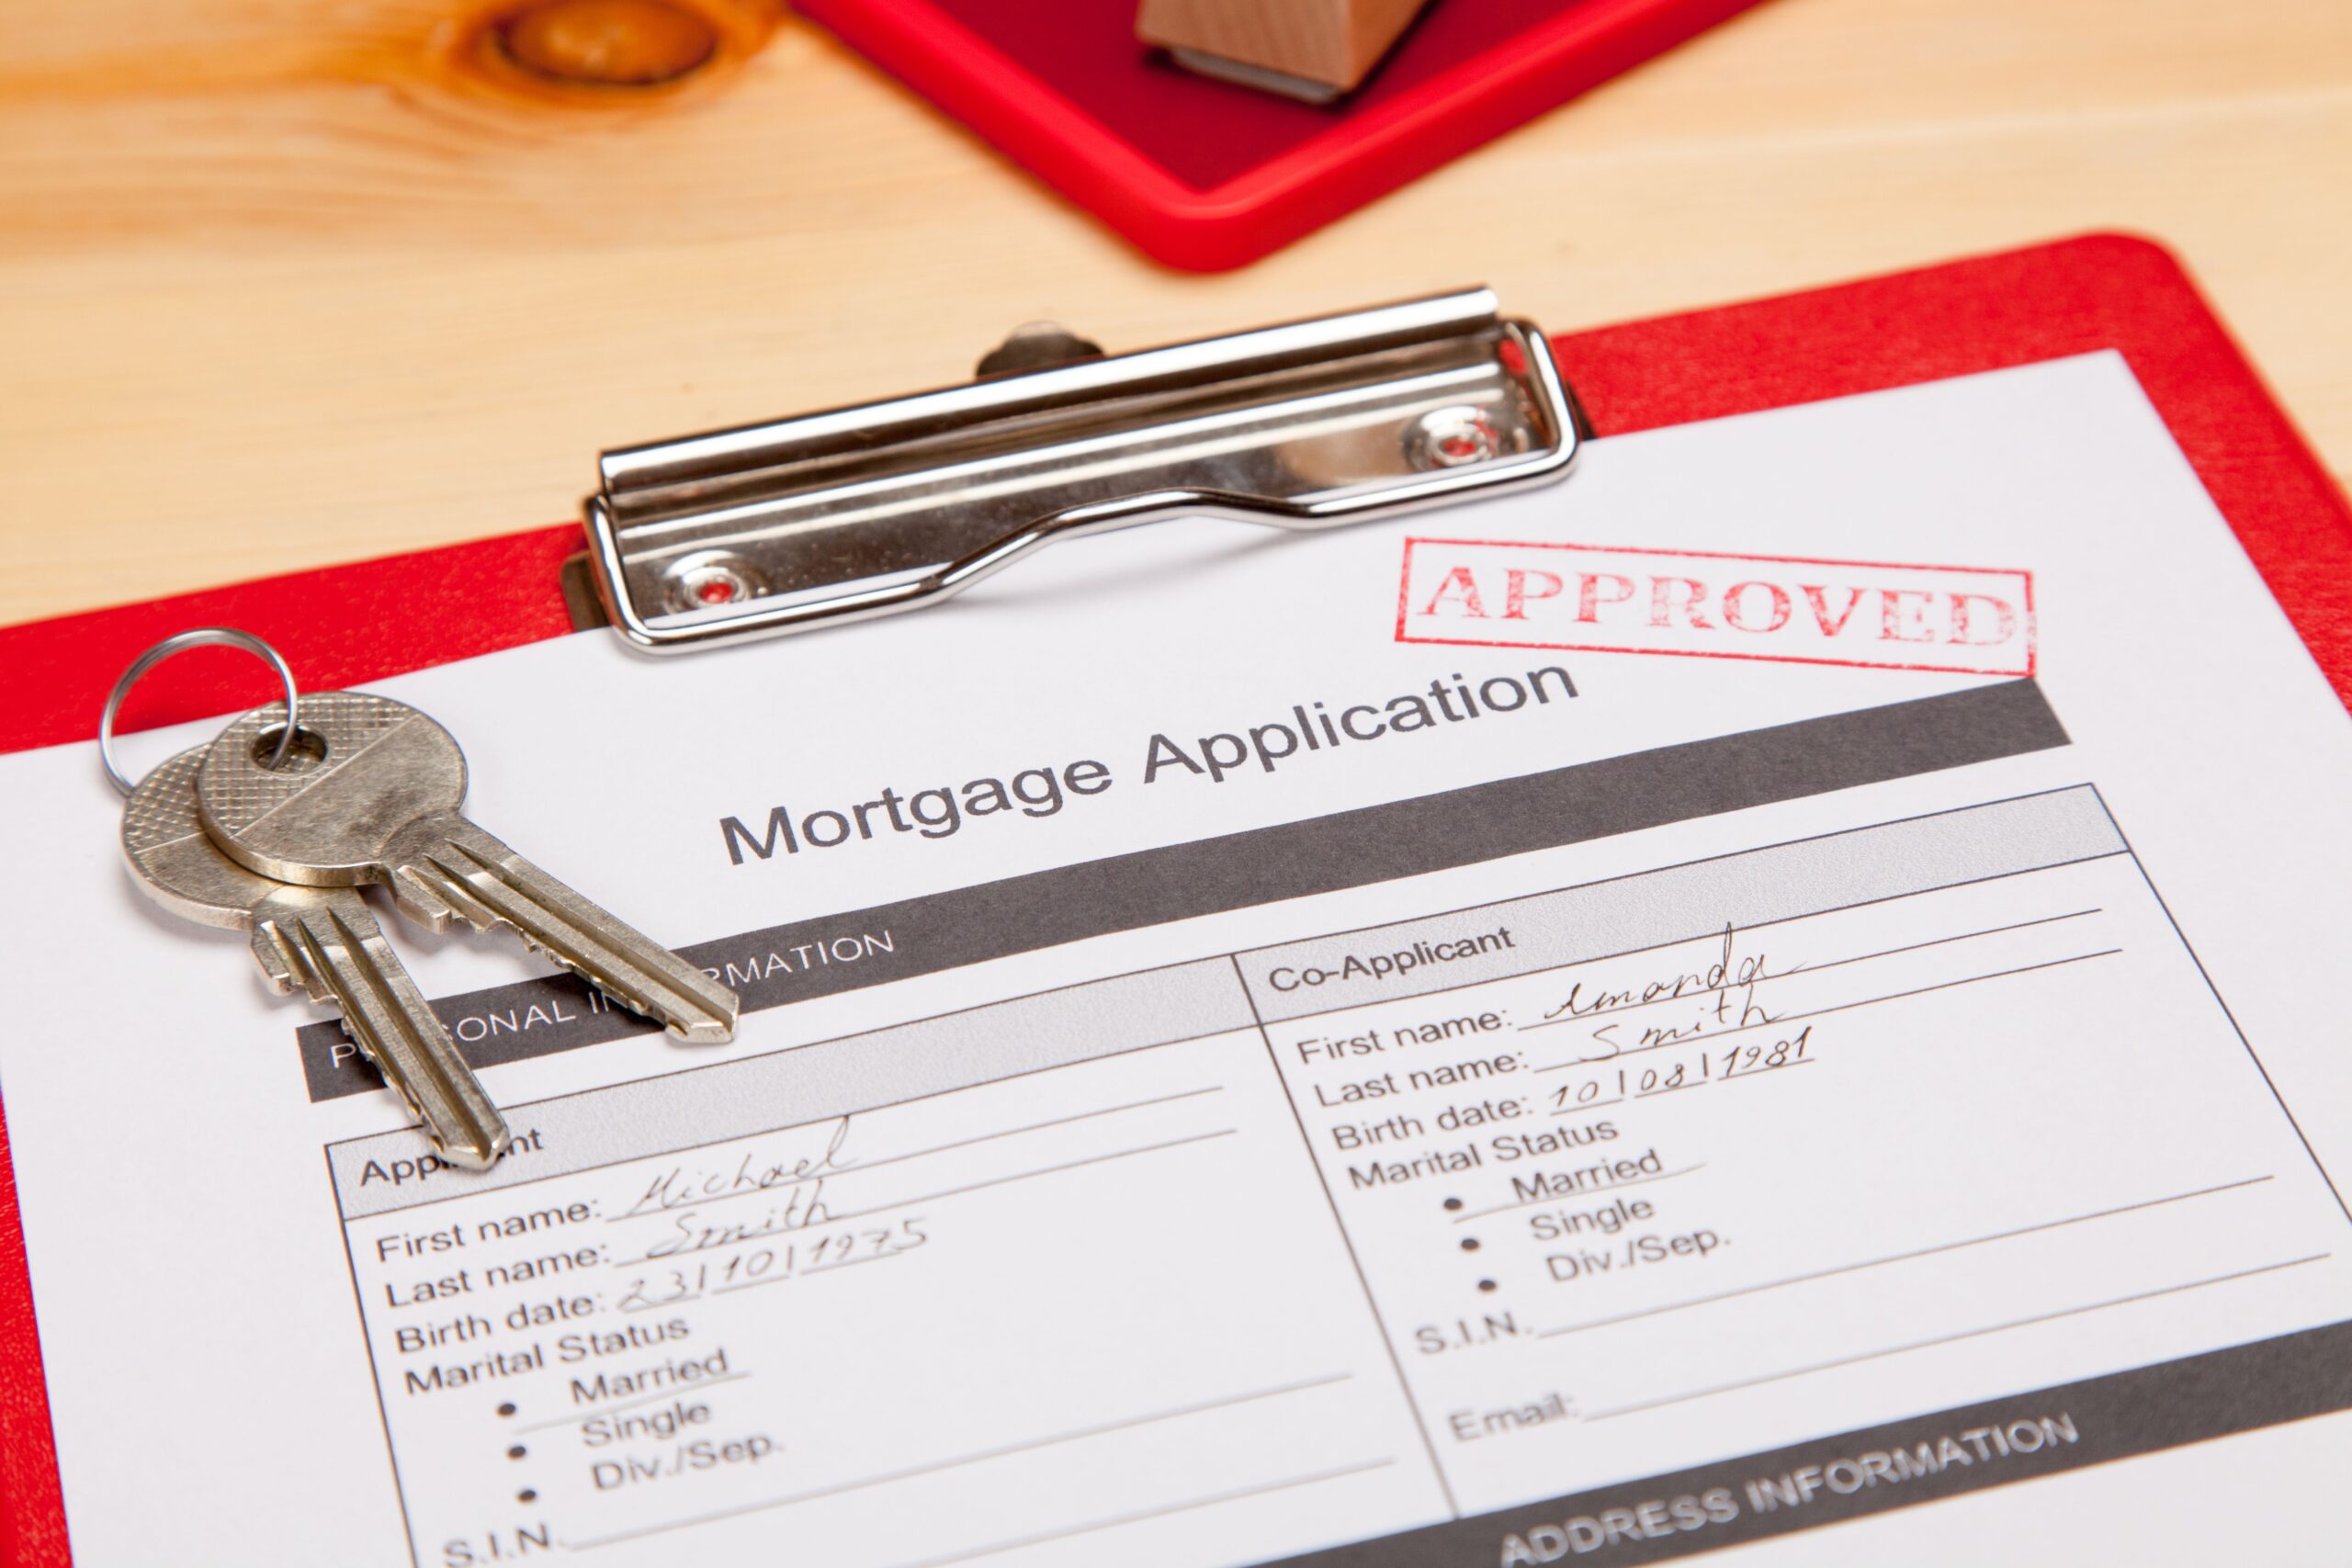 Get Mortgage after your IVA